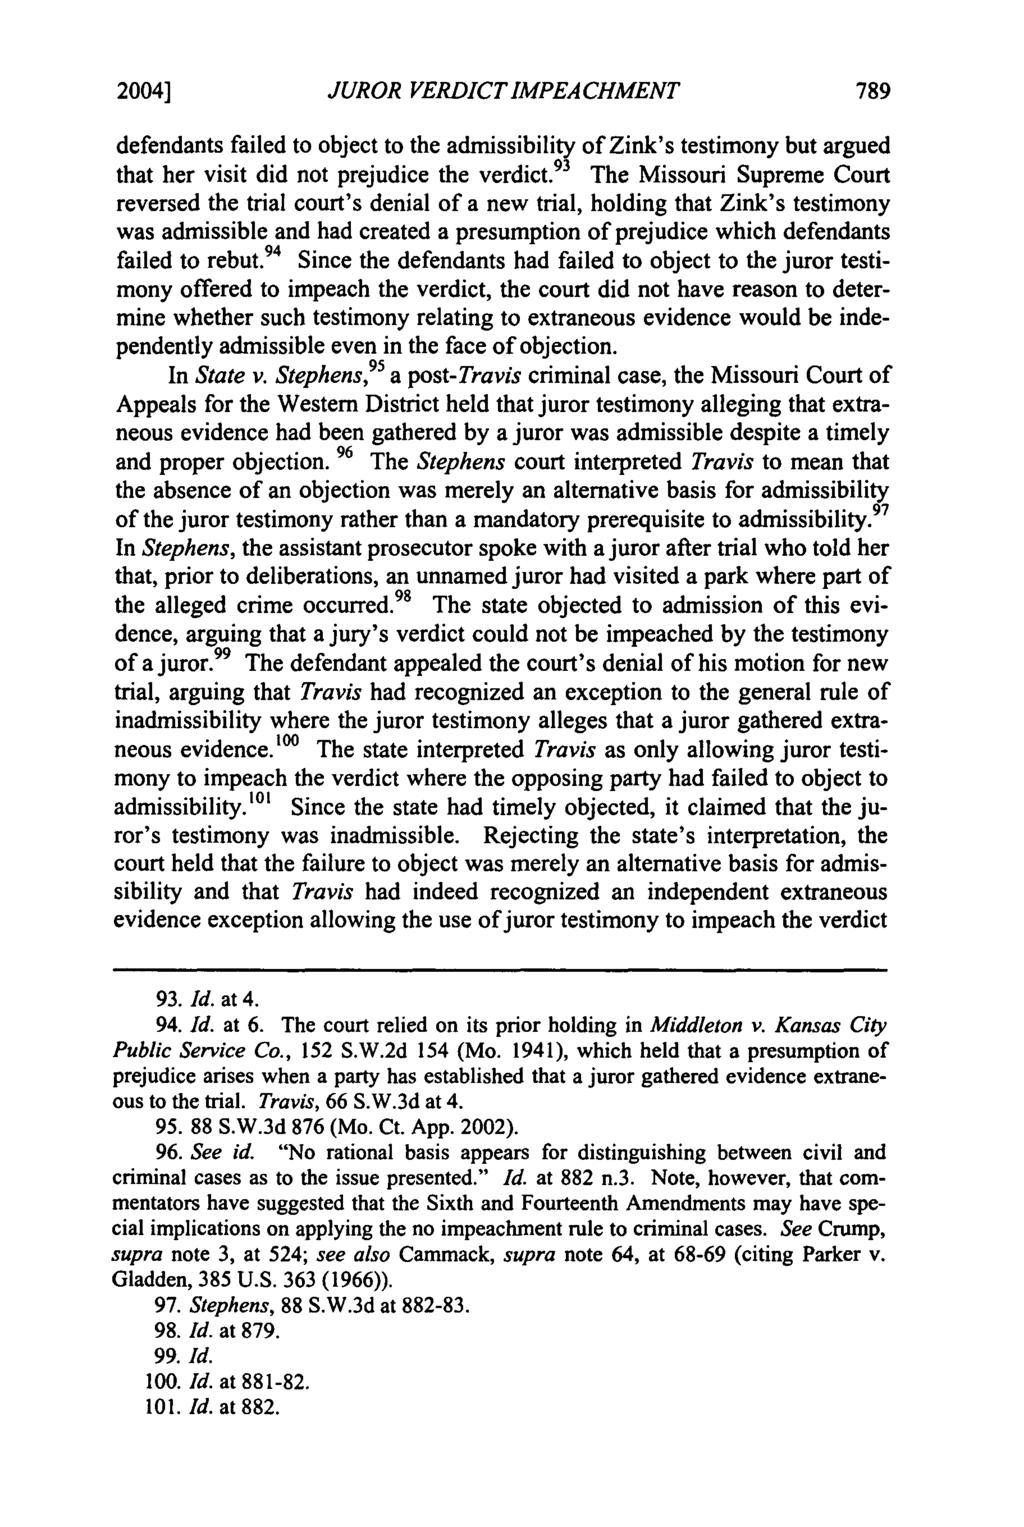 2004] Mudd: Mudd: Liberalizing the Mansfield Rule in Missouri: JUROR VERDICT IMPEACHMENT defendants failed to object to the admissibility of Zink's testimony but argued that her visit did not